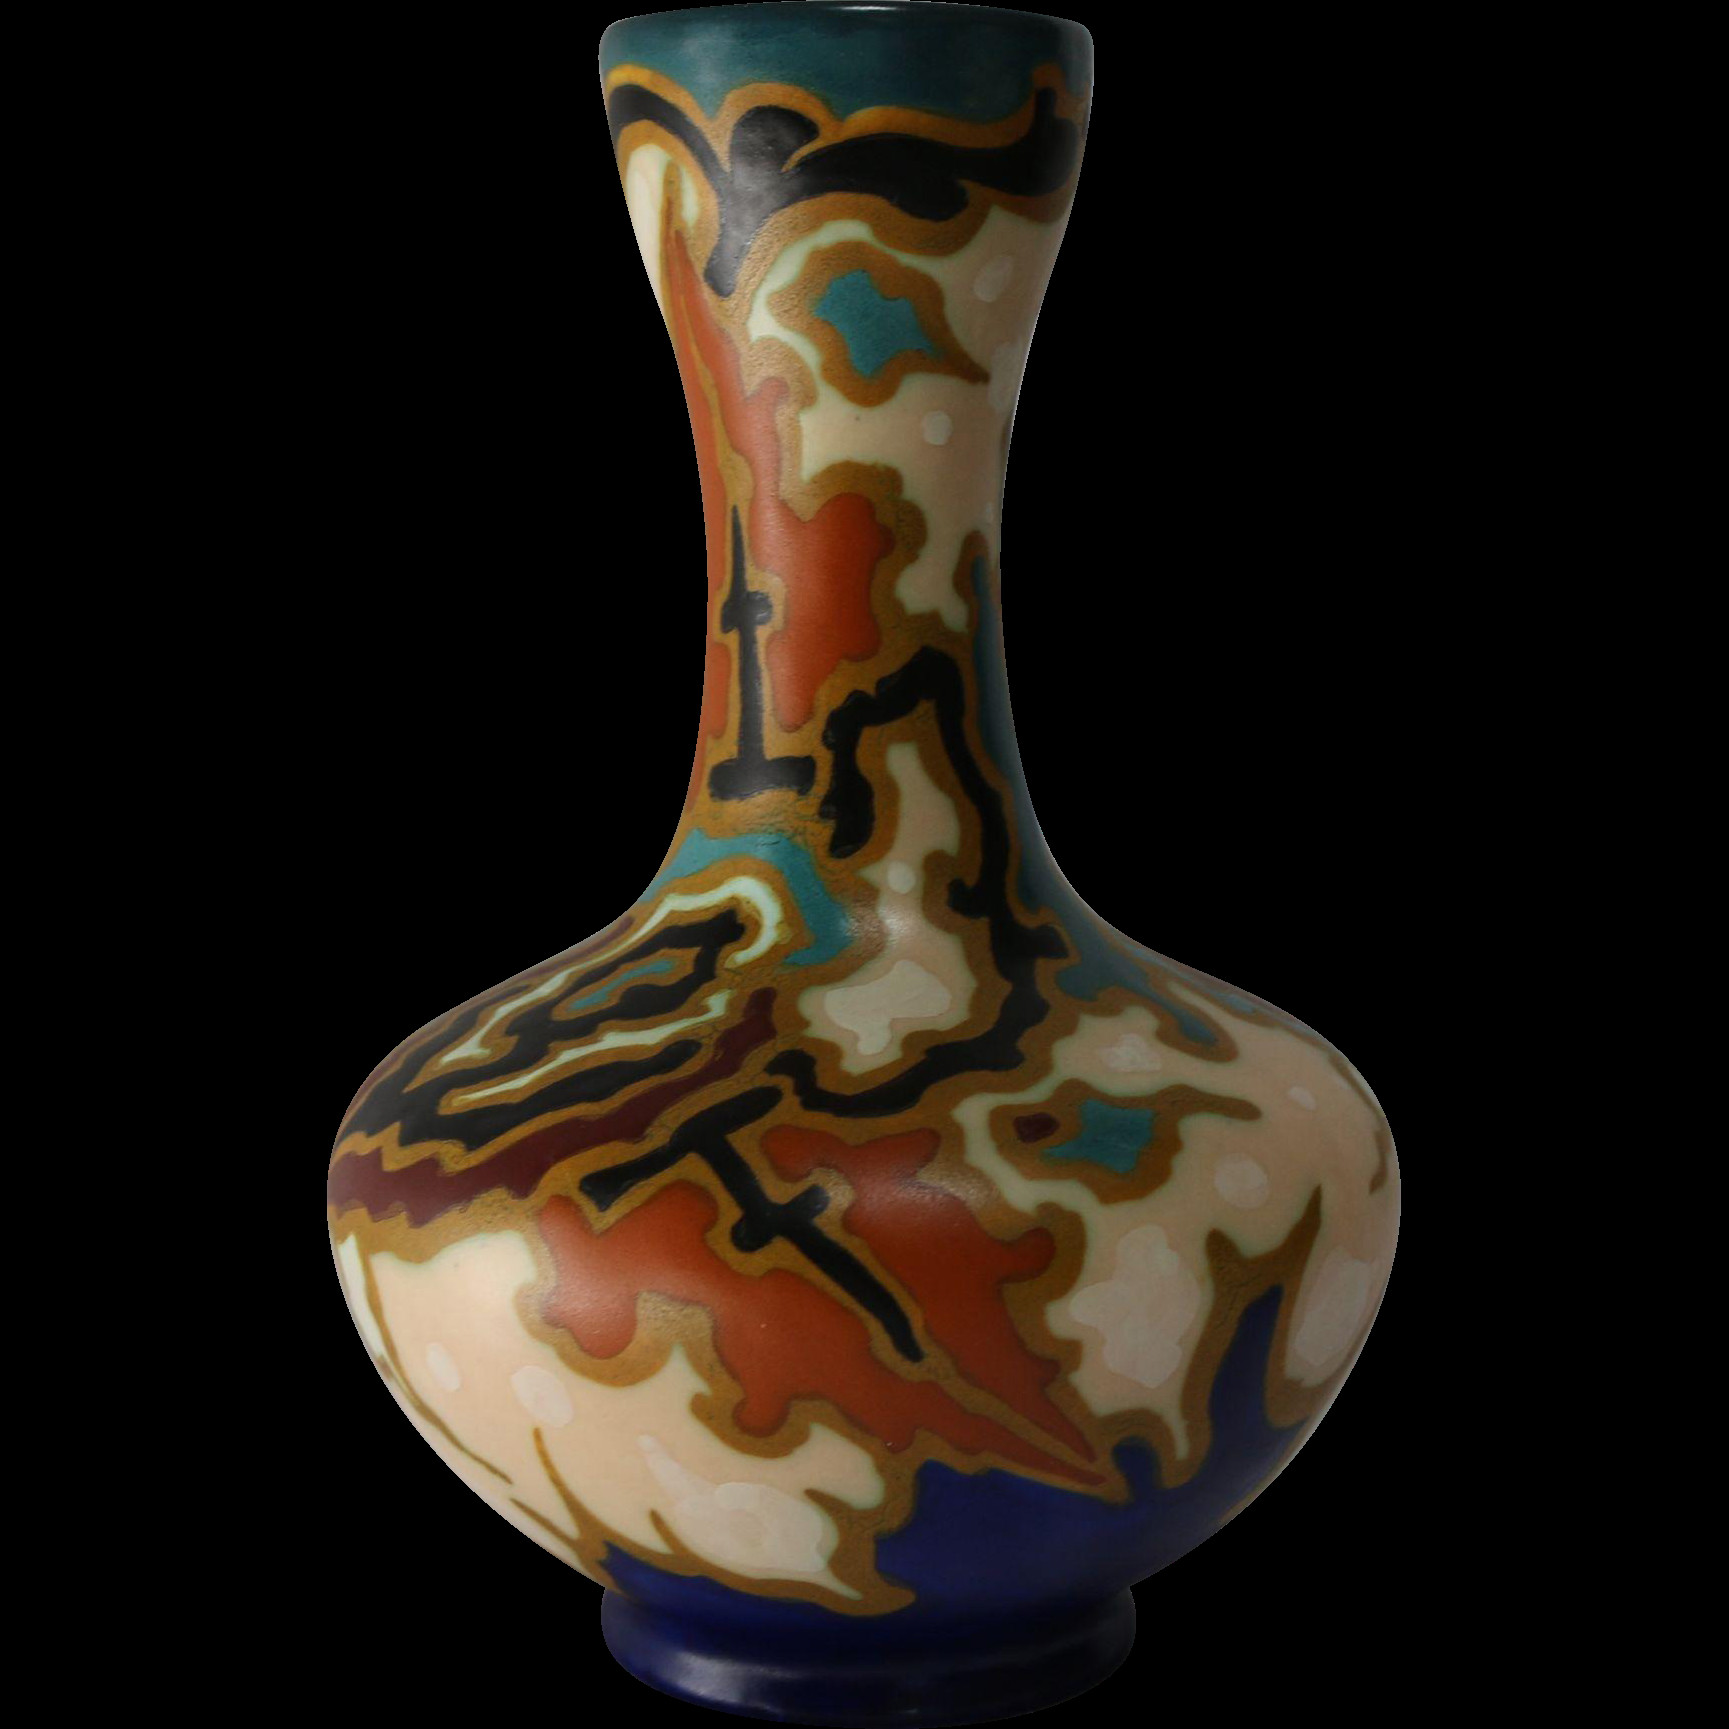 royal doulton vases 1920 of gouda art pottery vase by regina circa 1940s gouda pottery throughout the great bold patterns of 1920s gouda art pottery is what still makes it appealing today this small vase was made in the regina factory the